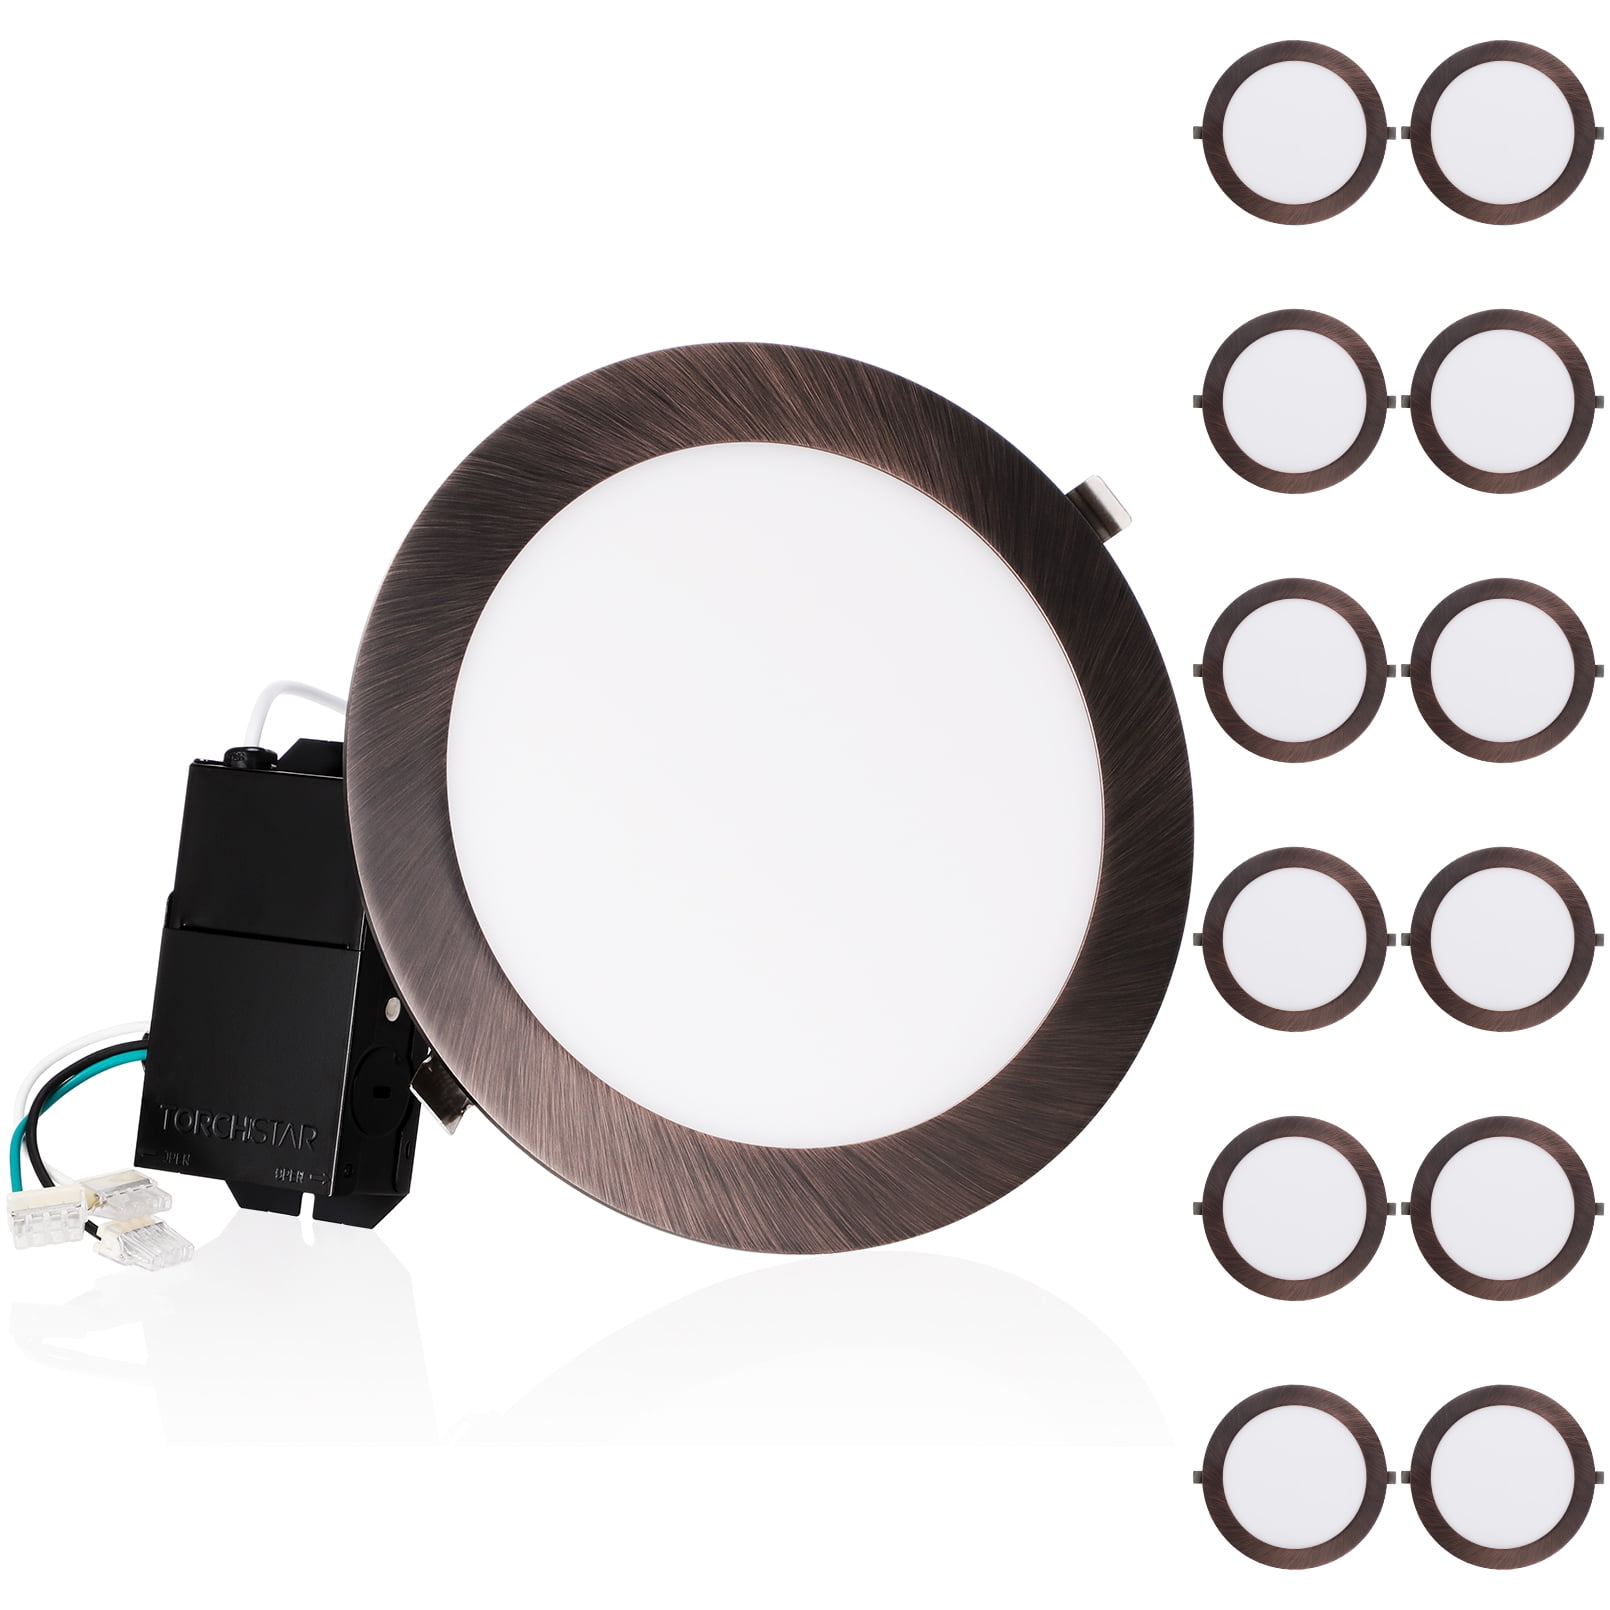 TORCHSTAR 12-Pack E-Lite Series 18W Inch Ultra-Thin LED Recessed Light  with J-Box, Dimmable, 1250lm Slim Panel Downlight, Oil Rubbed Bronze, 4000K  Cool White, ETL  Energy Star Certified